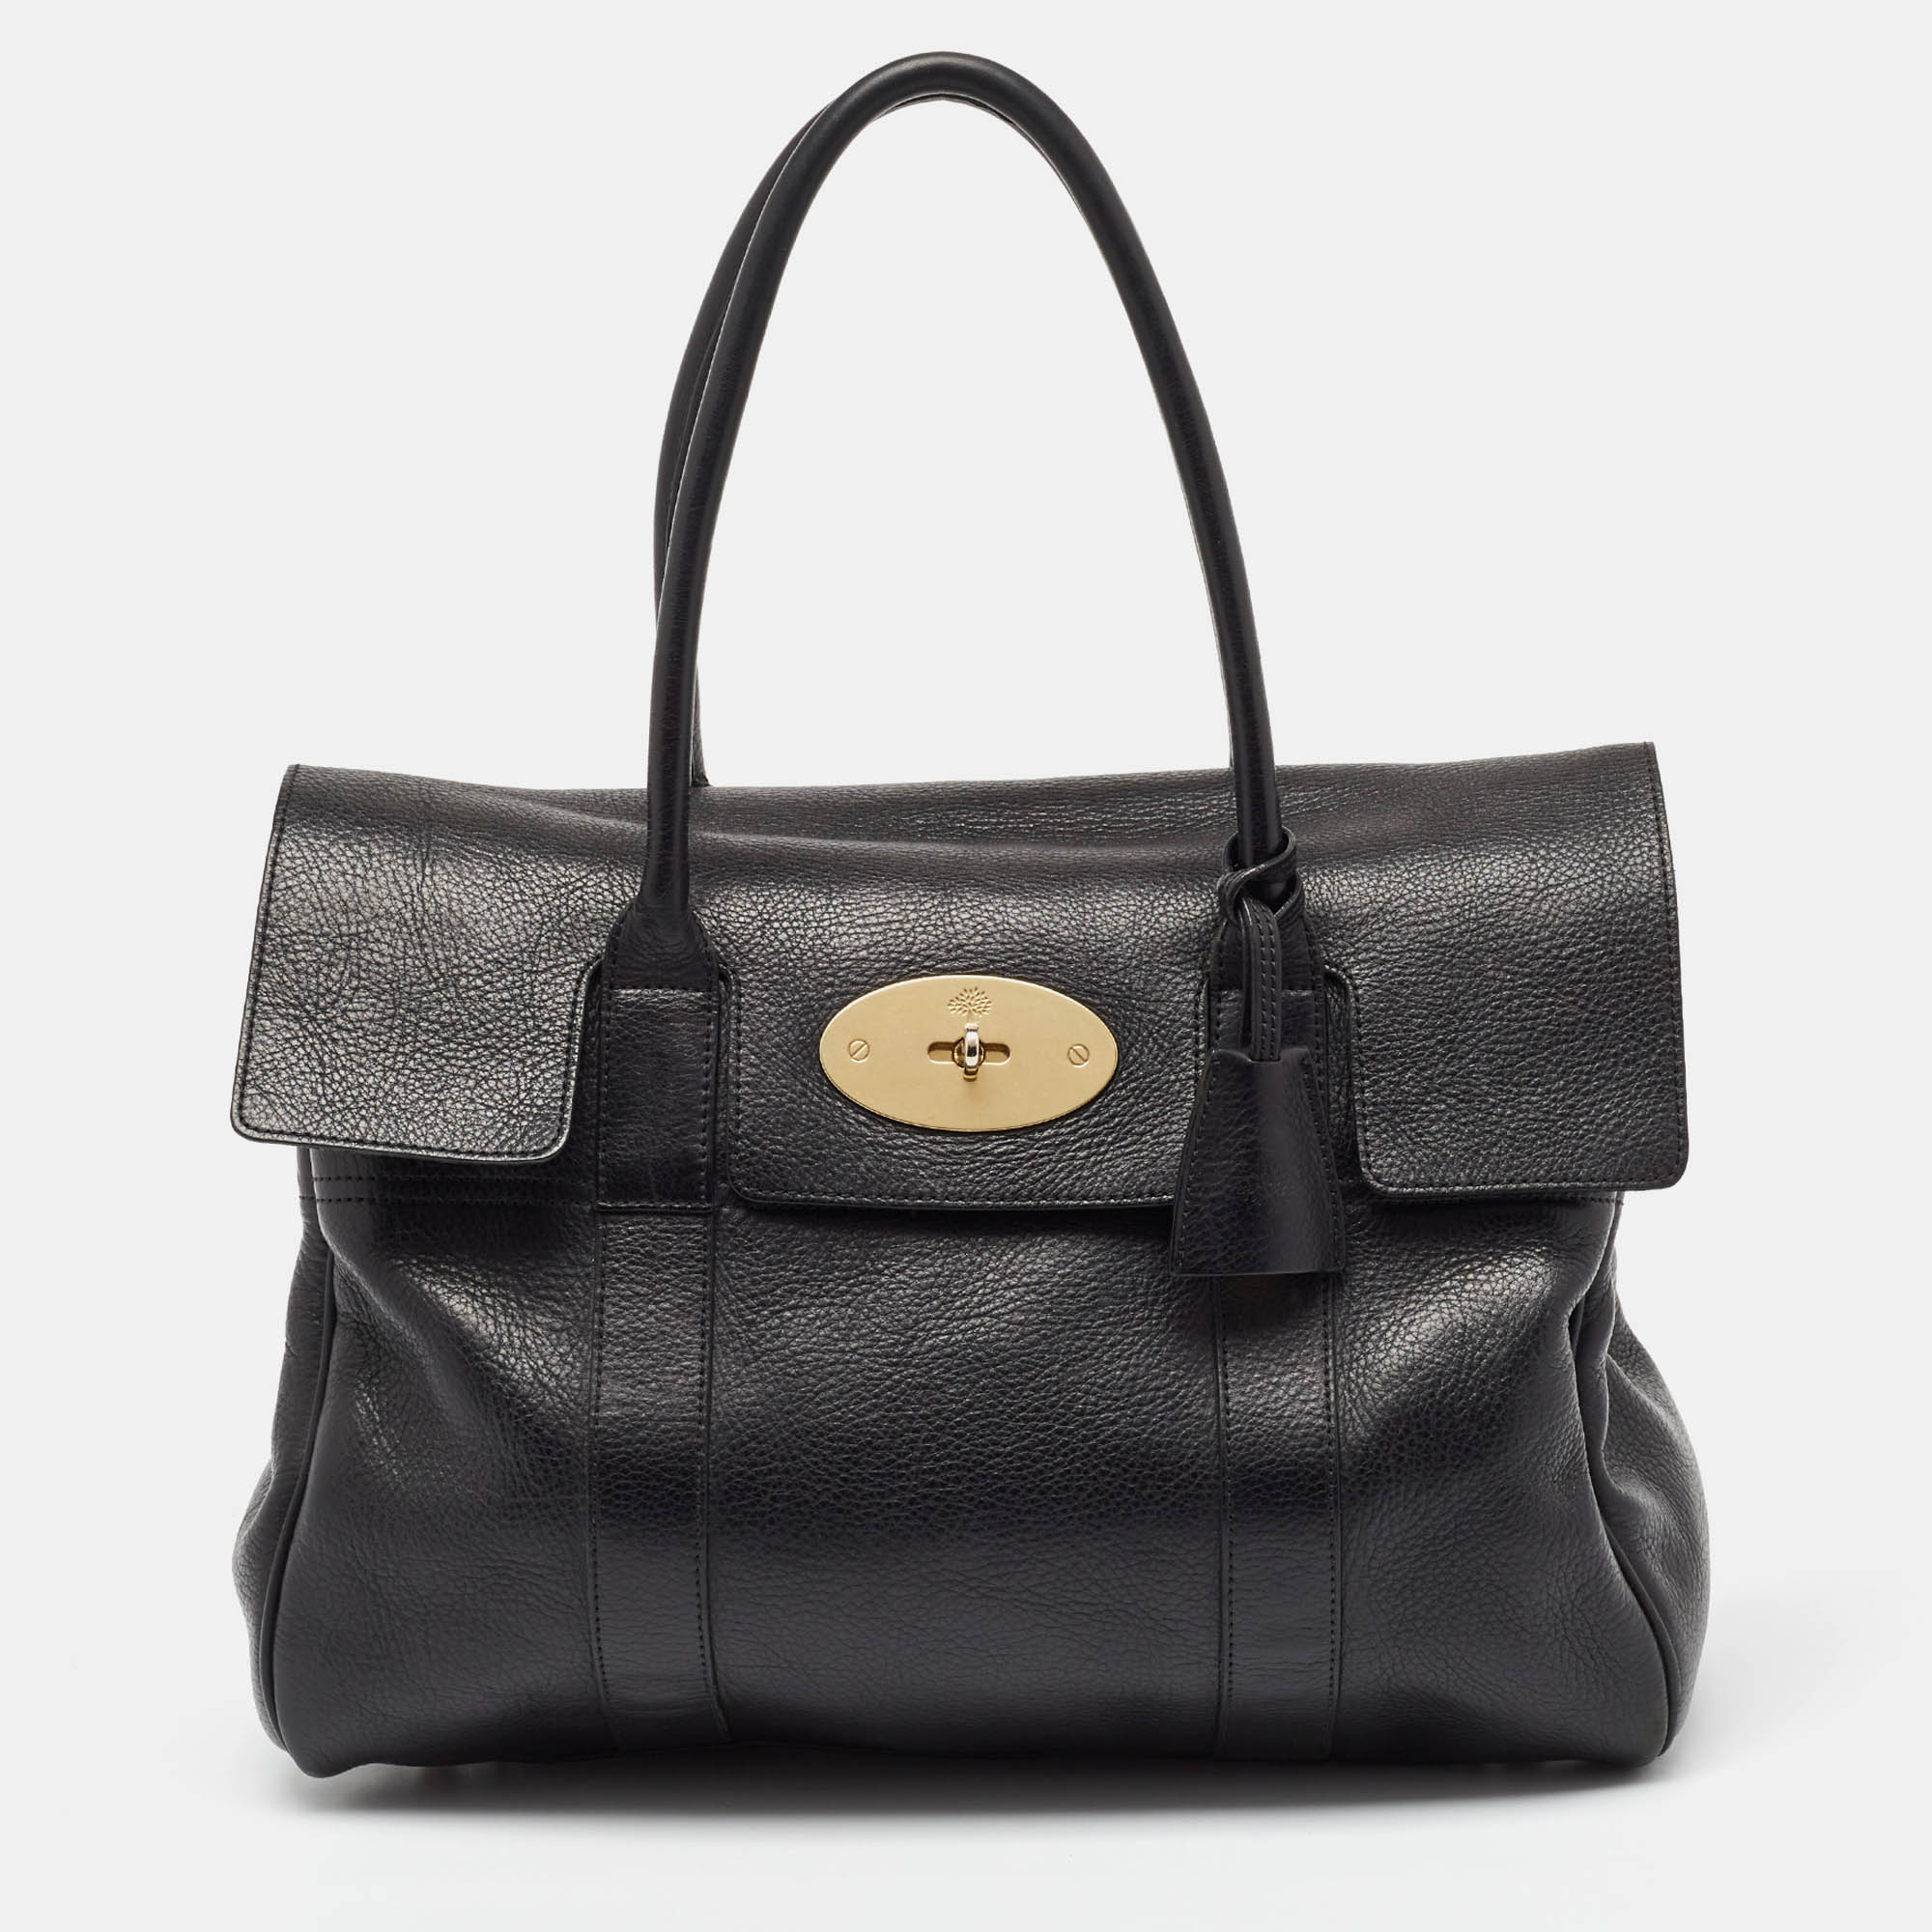 Pre-owned Mulberry Black Leather Bayswater Satchel